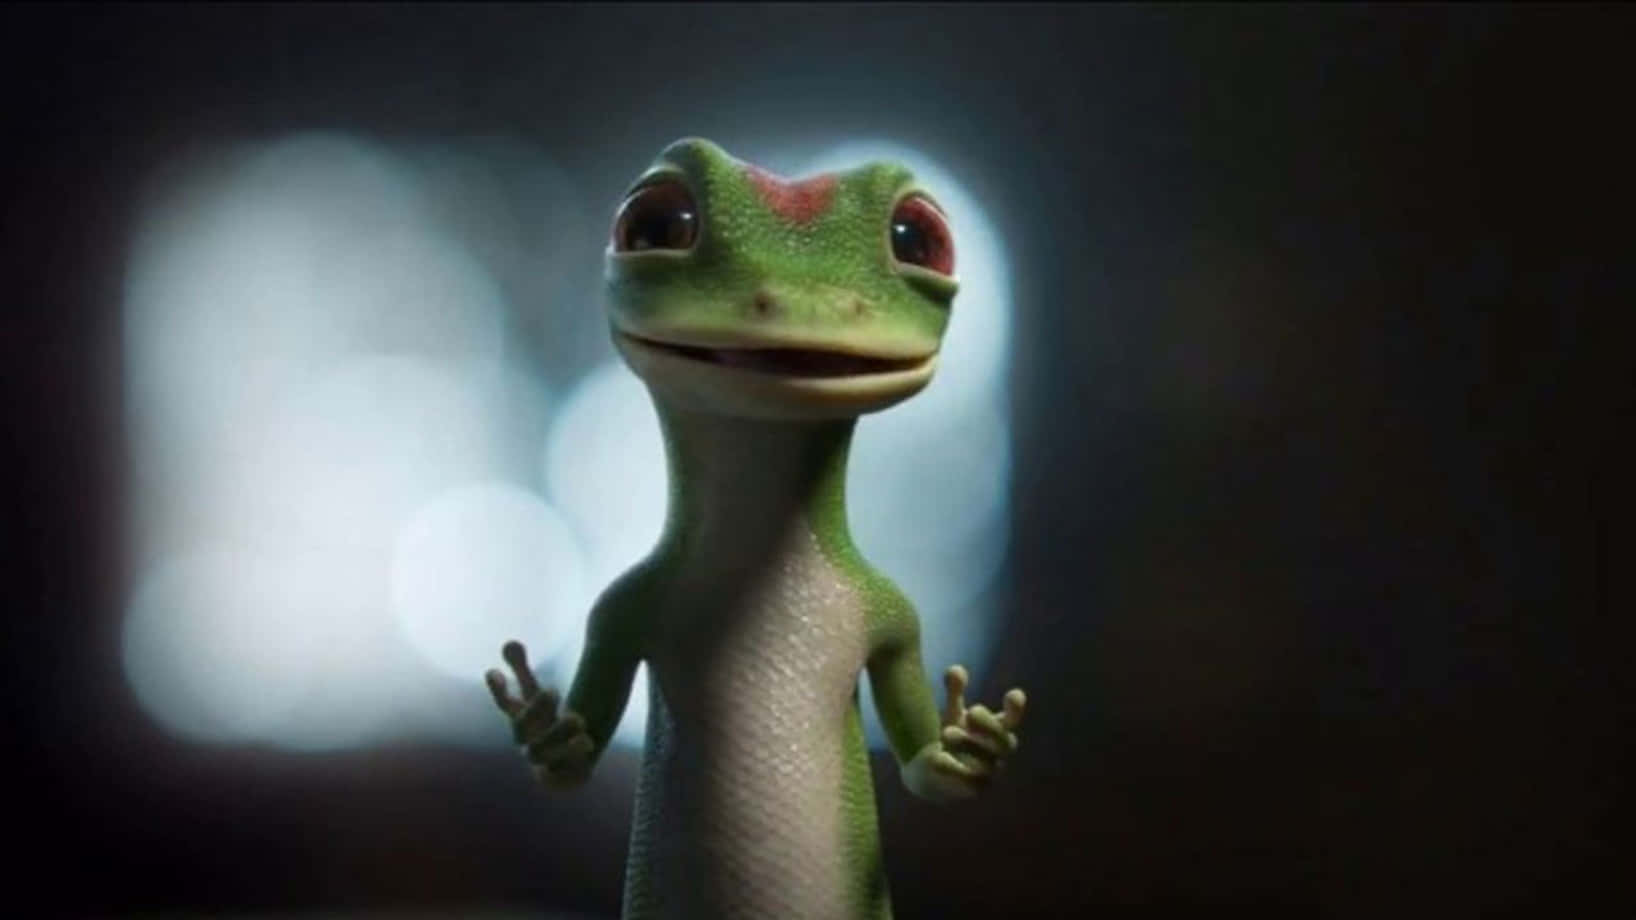 A picture of the iconic Geico gecko